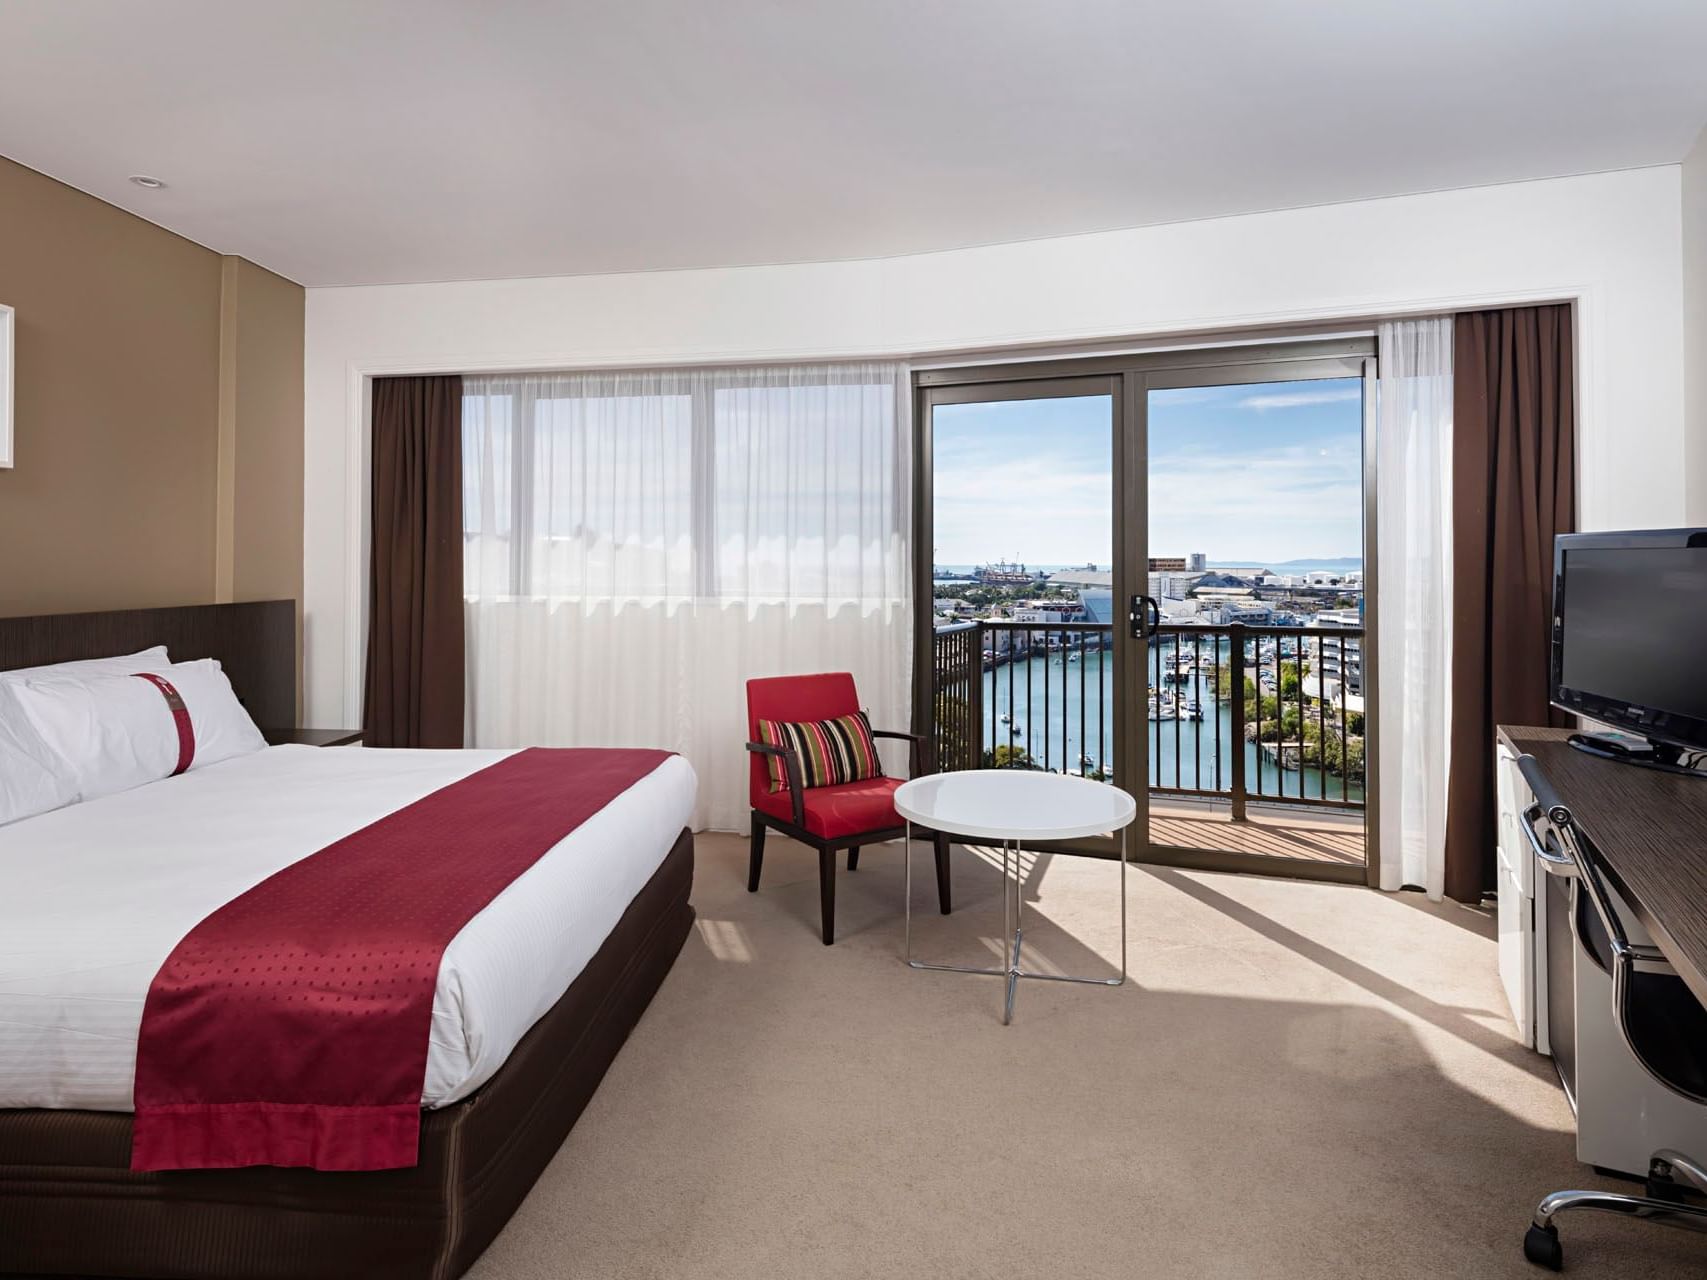 King-size bed, TV & balcony view in Standard King room at Hotel Grand Chancellor Townsville